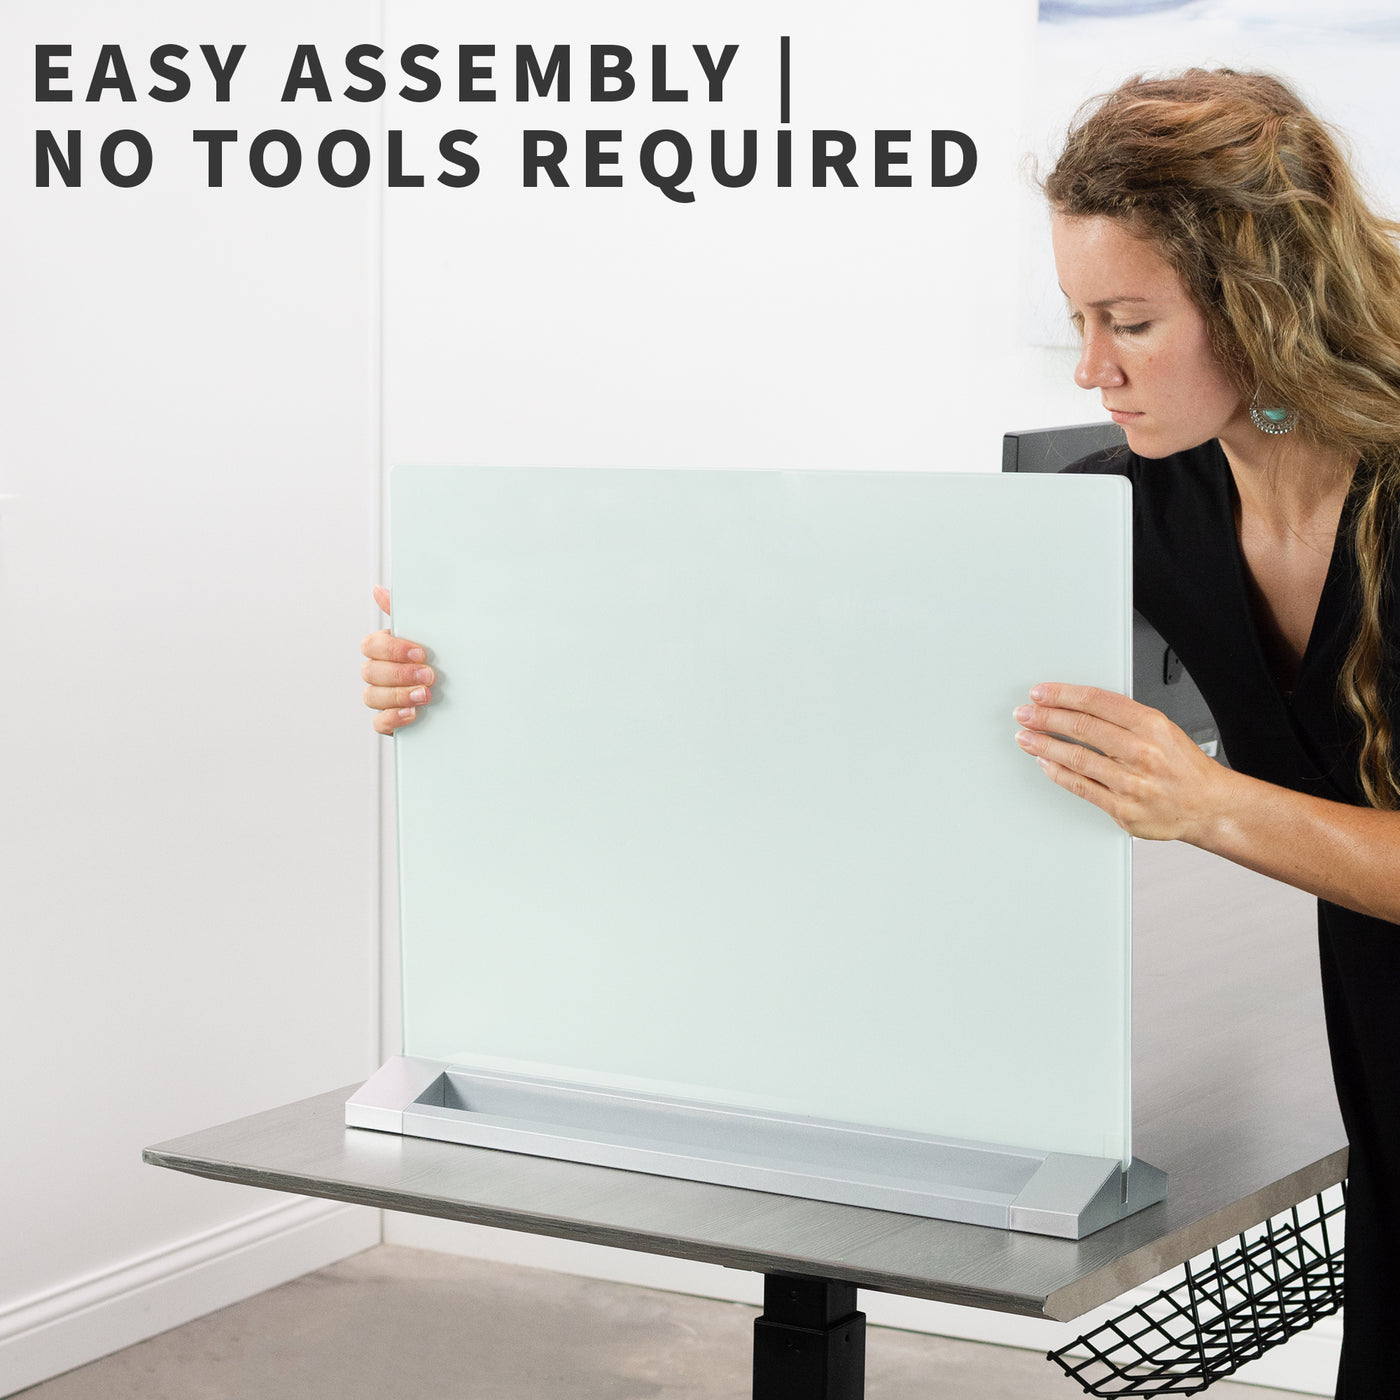 Easy assembly with no tools required.